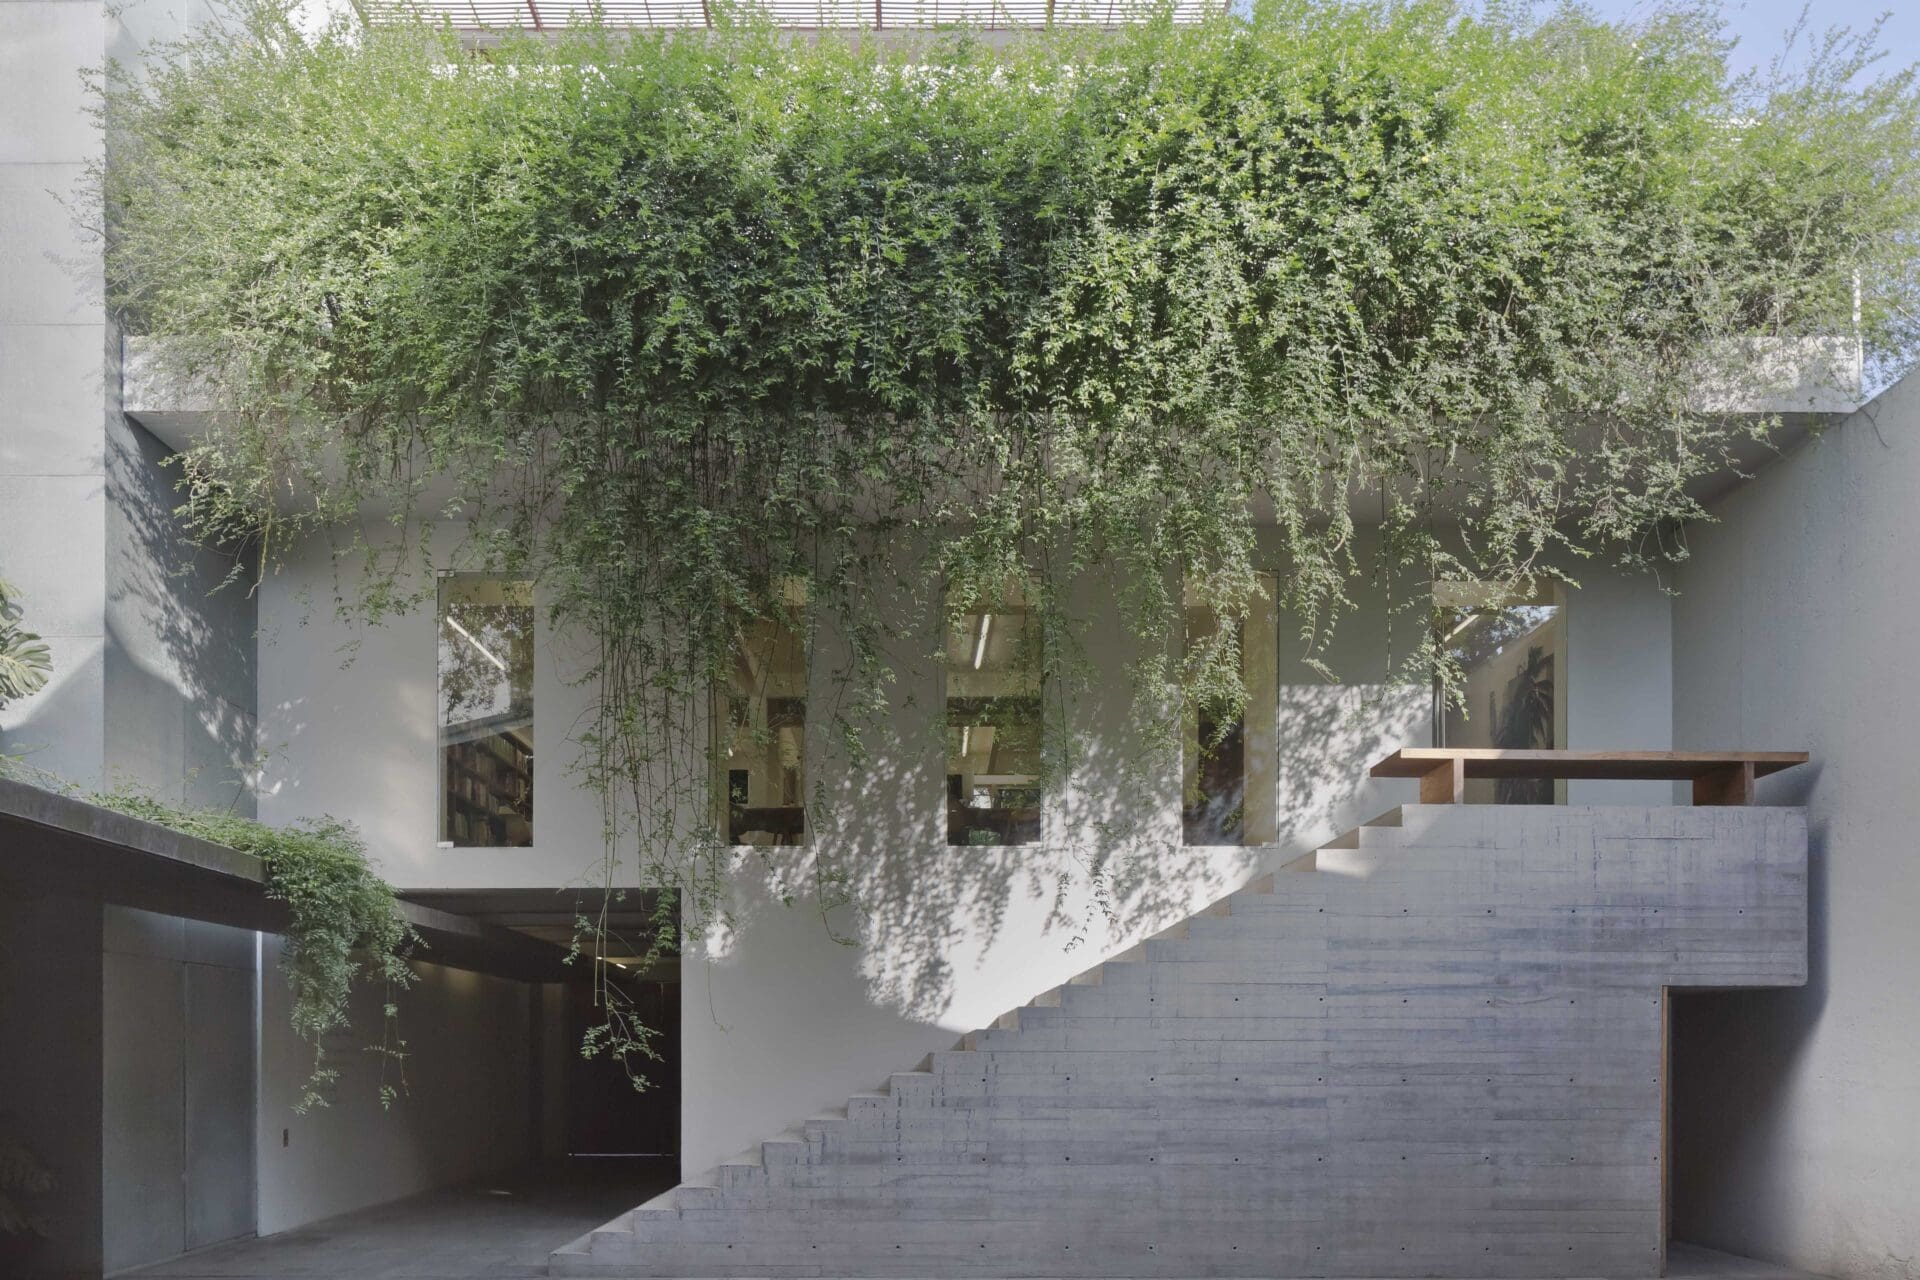 The best art galleries and museums in Mexico City | The courtyard in Kurimanzutto gallery.